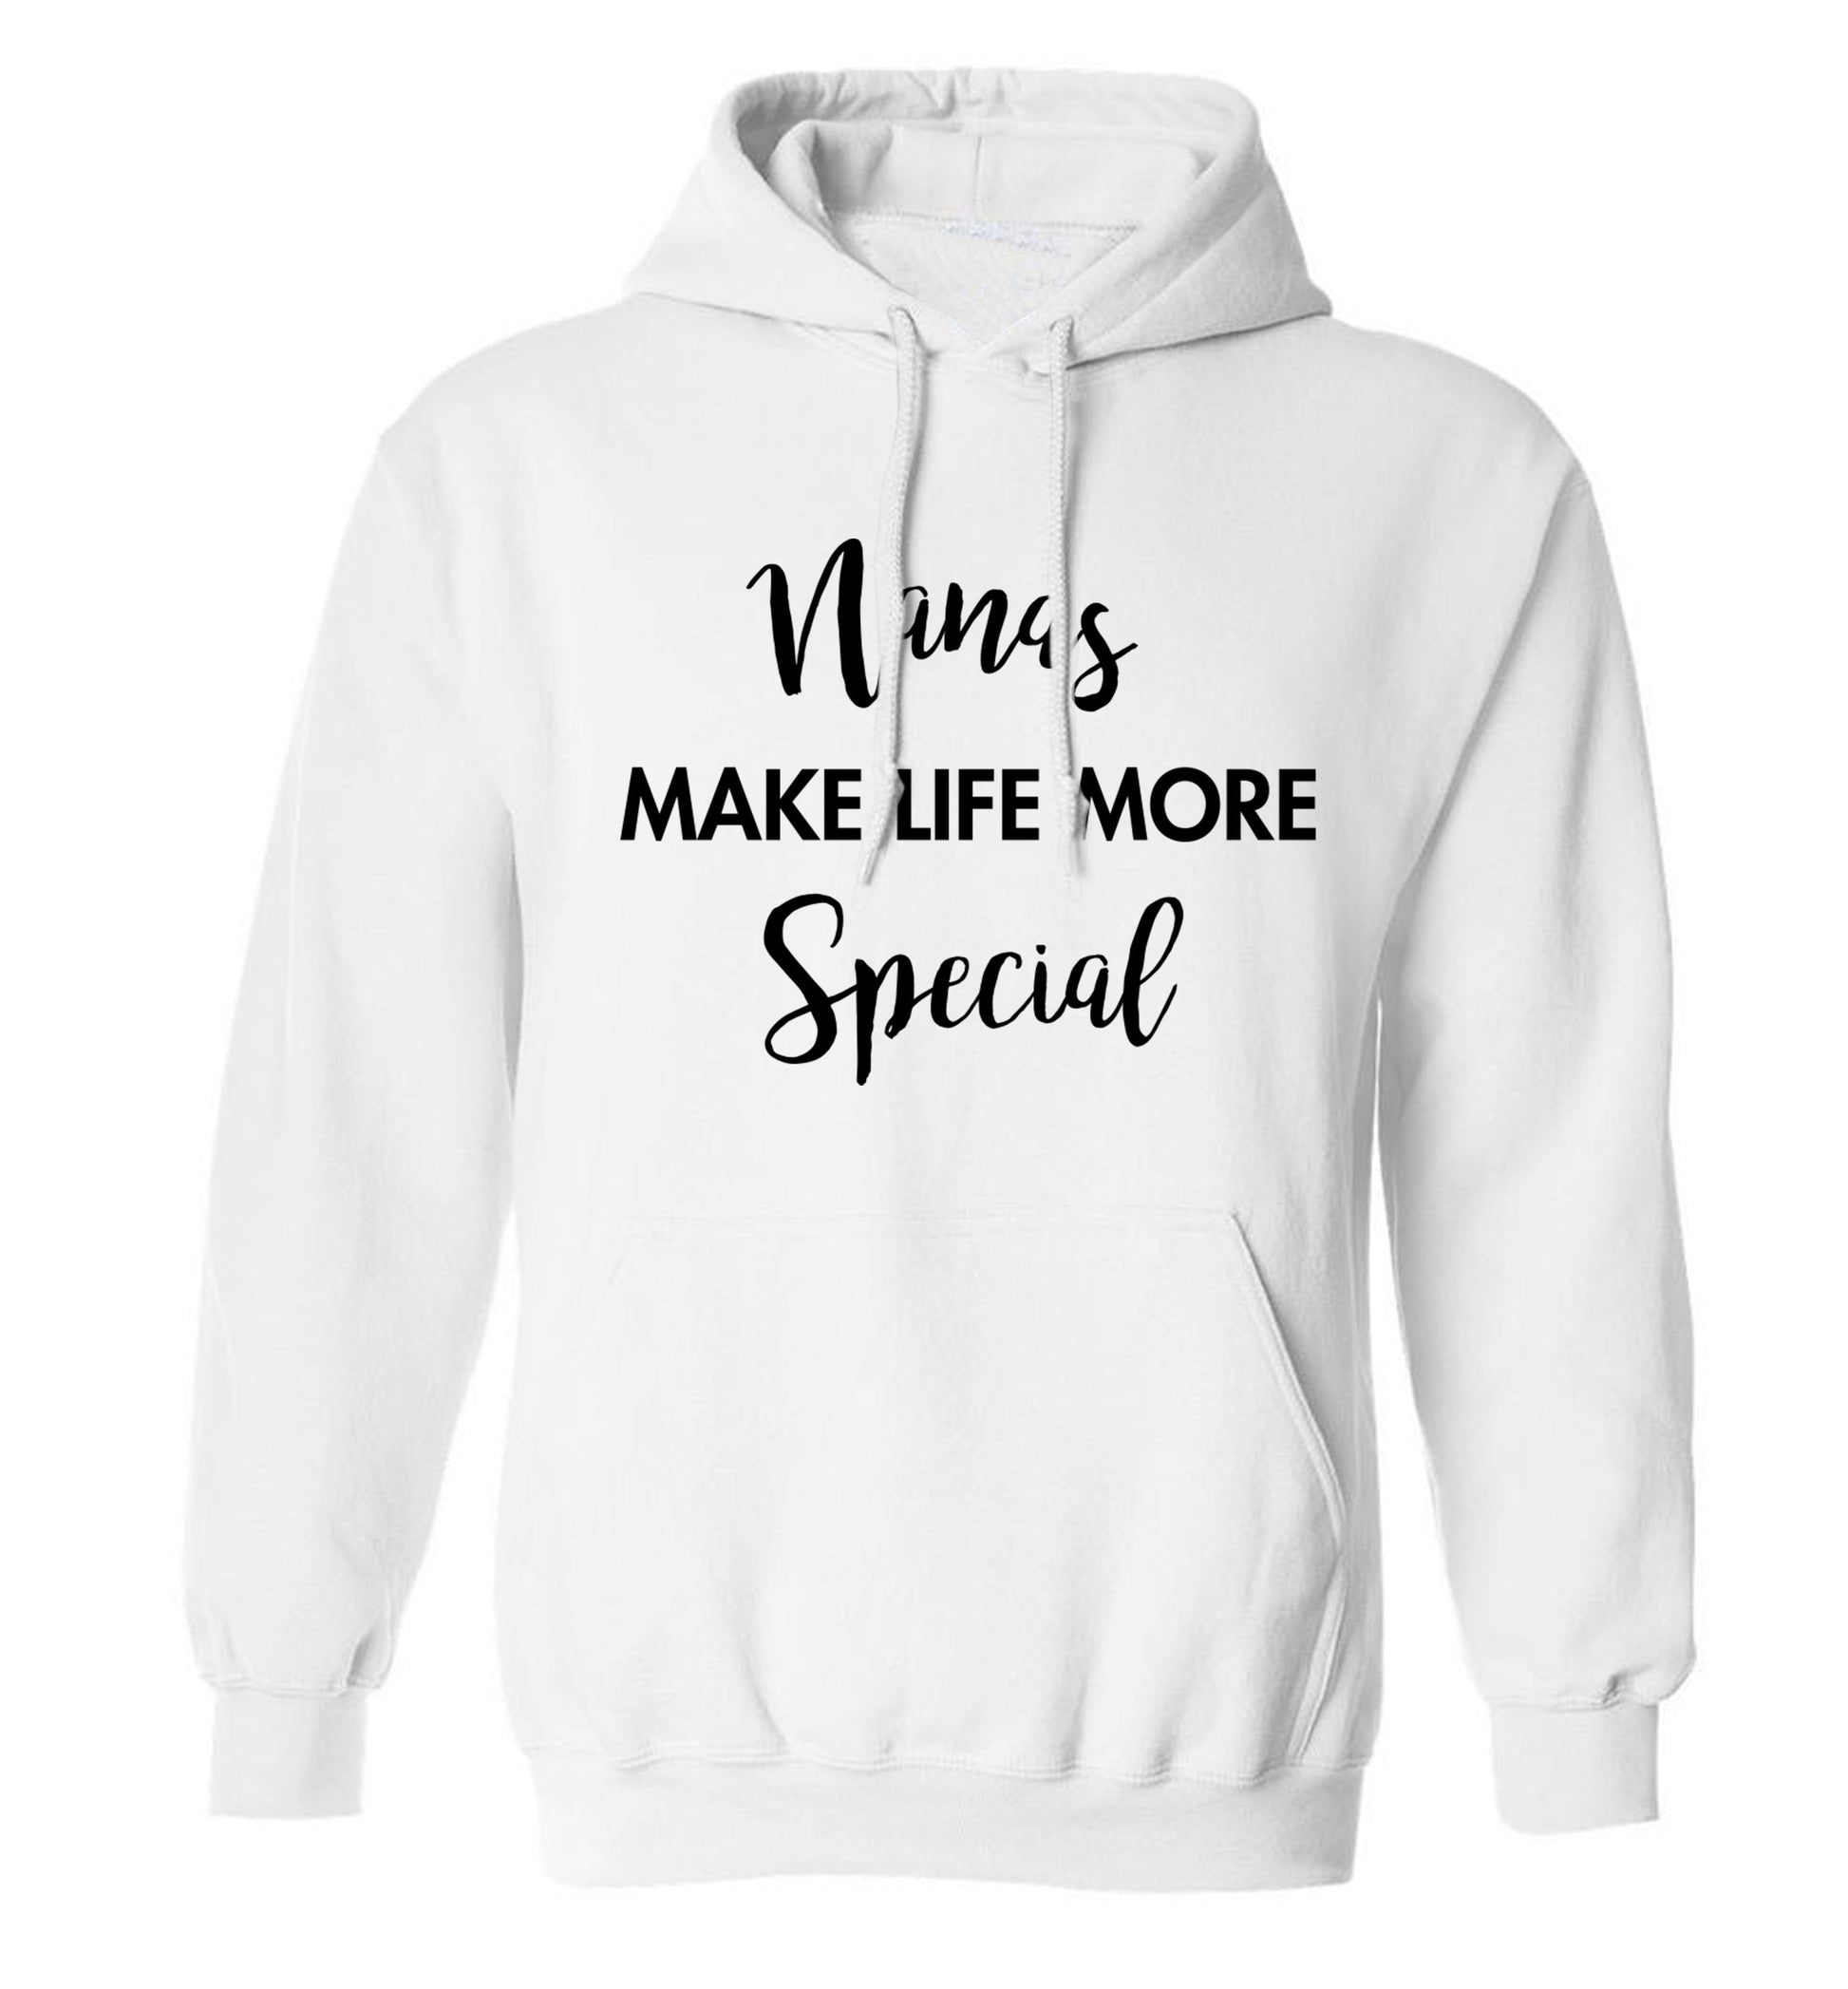 Nanas make life more special adults unisex white hoodie 2XL